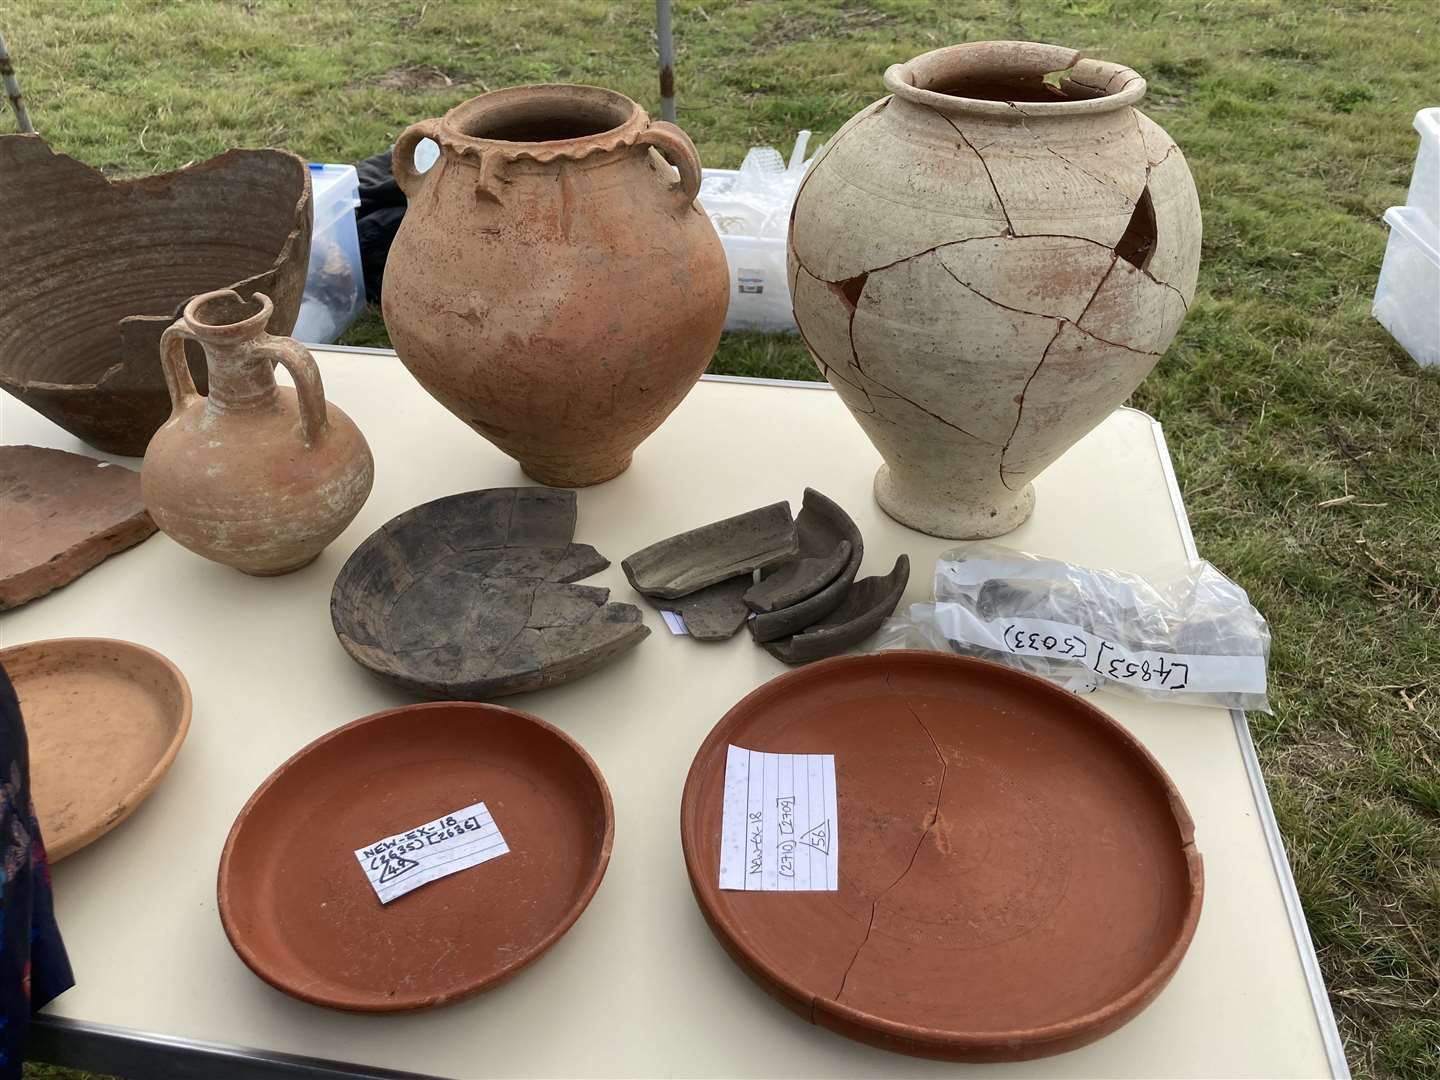 Some of the fragments of pottery unearthed around the 2,000-year-old temple at Newington near Sittingbourne